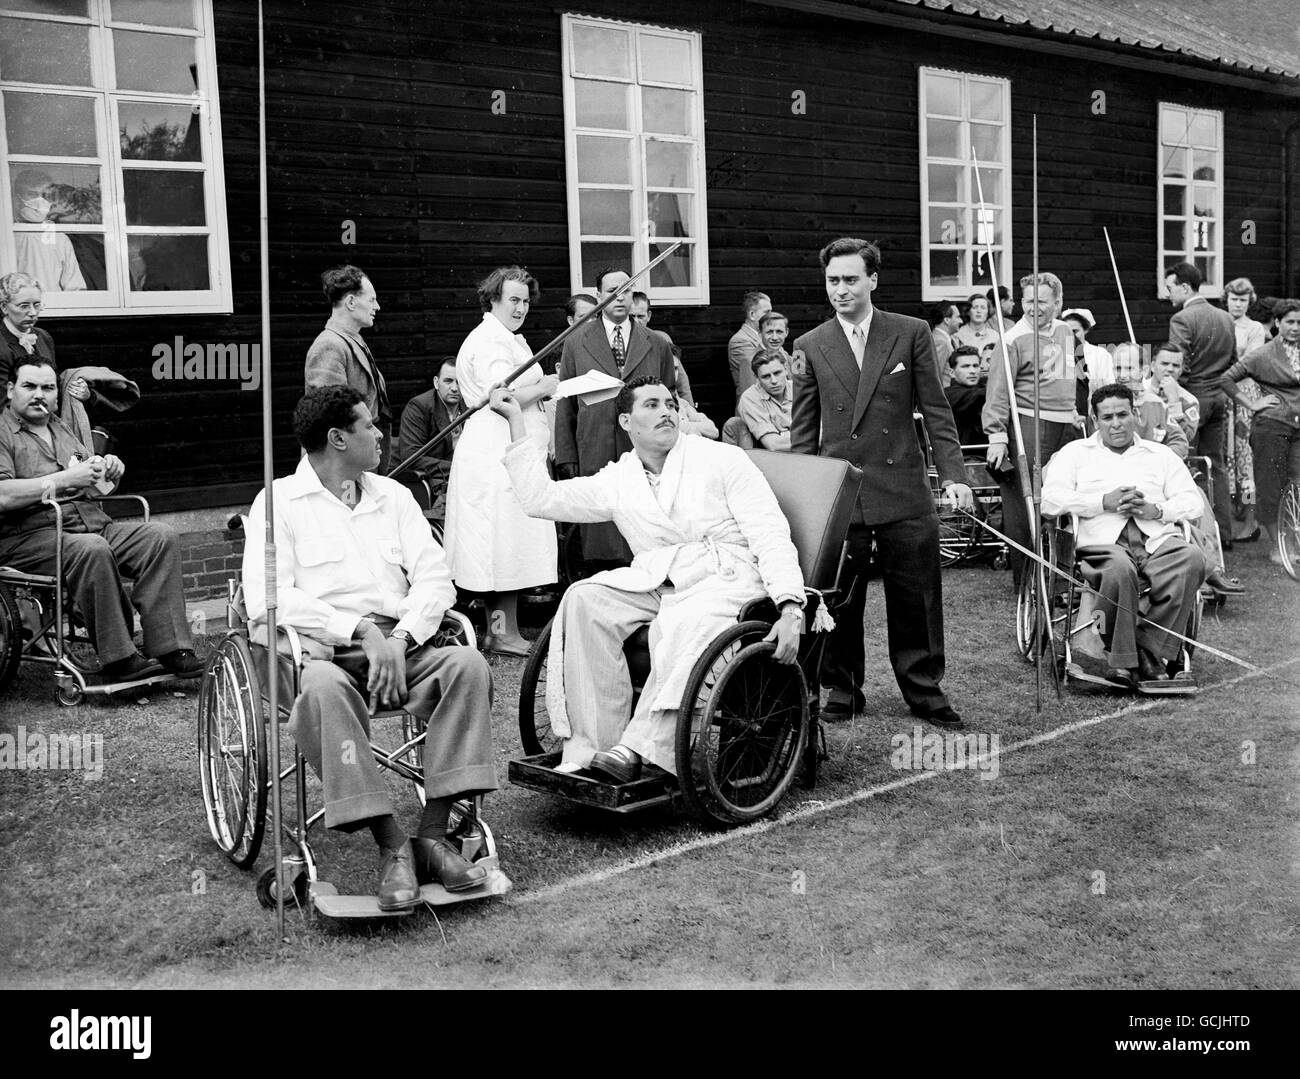 7th Annual International Inter Spinal Unit Sports Festival - Stoke Mandeville Hospital. Egyptian Javellin throwers L-R: L Mira and I Taufik Stock Photo